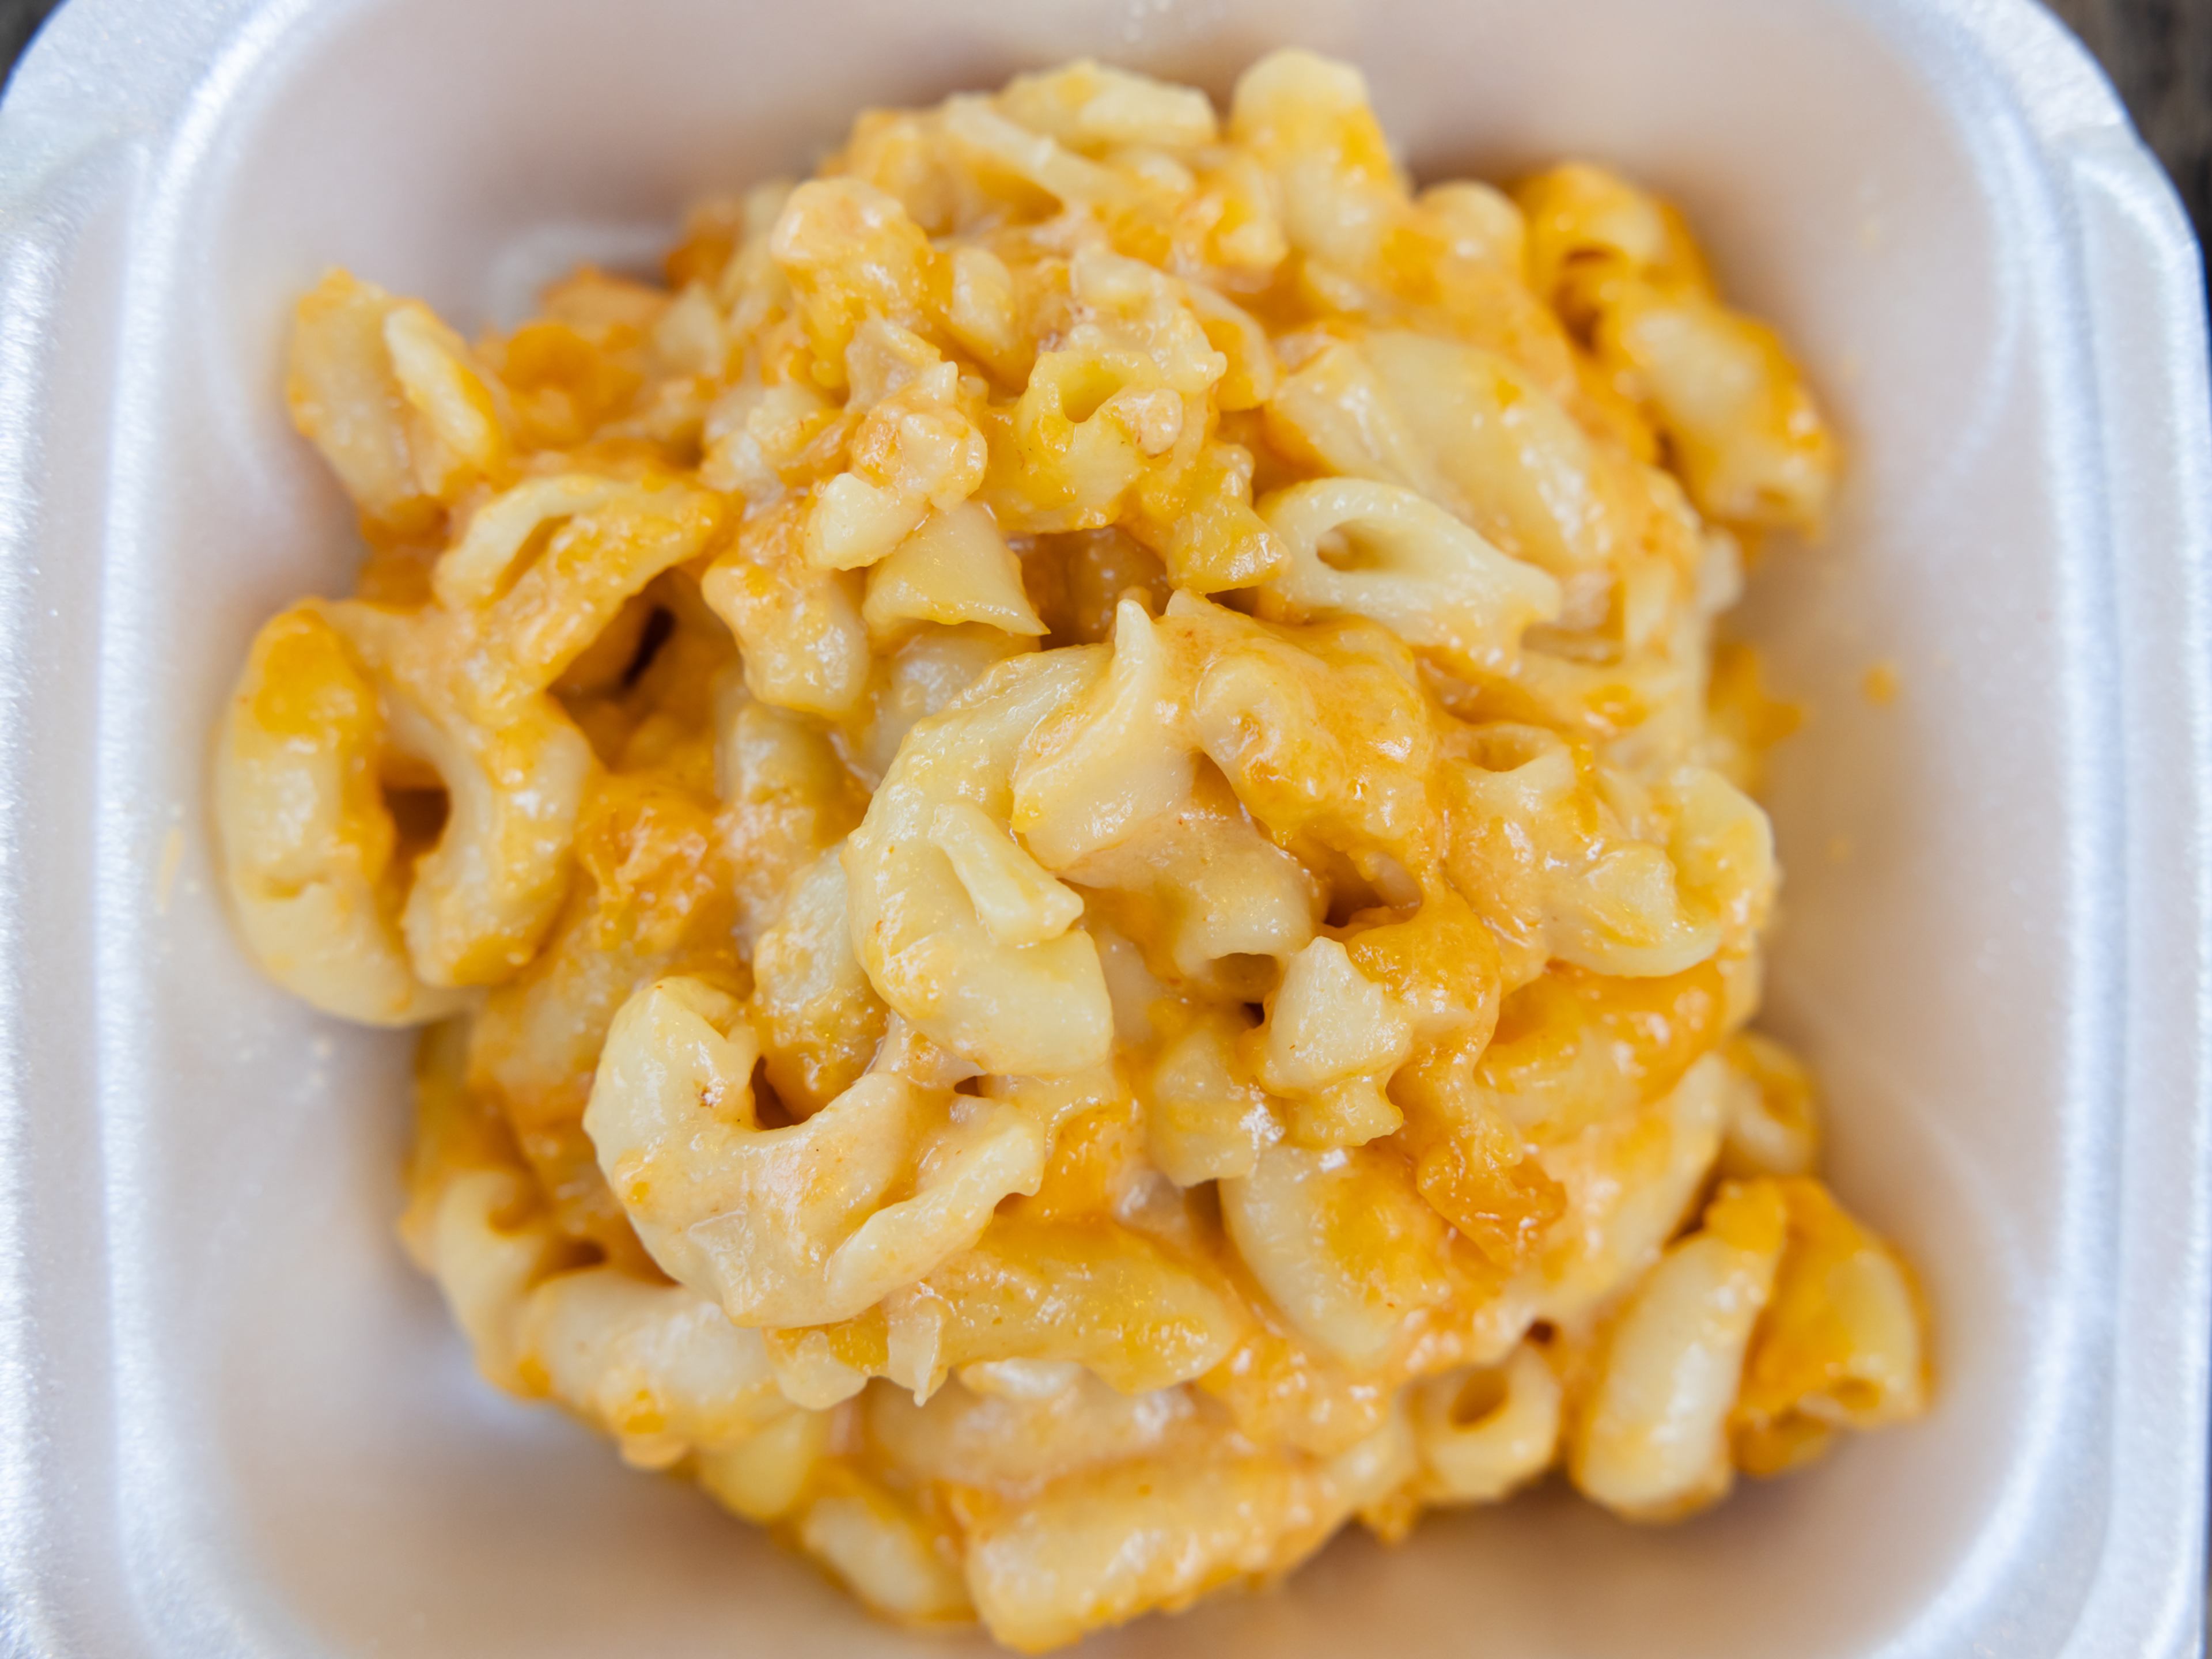 Mac in cheese in a styrofoam container.